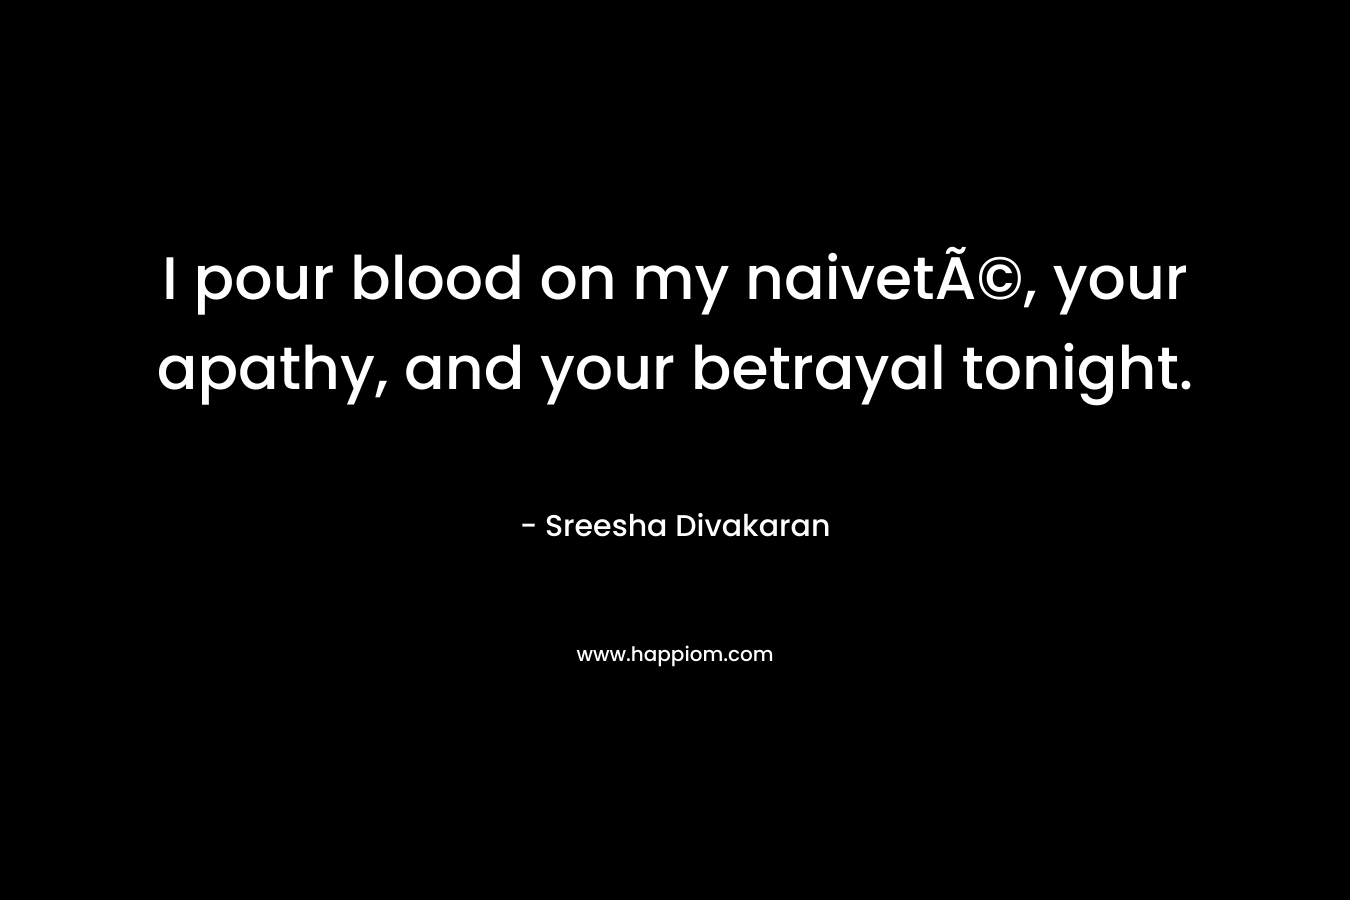 I pour blood on my naivetÃ©, your apathy, and your betrayal tonight. – Sreesha Divakaran